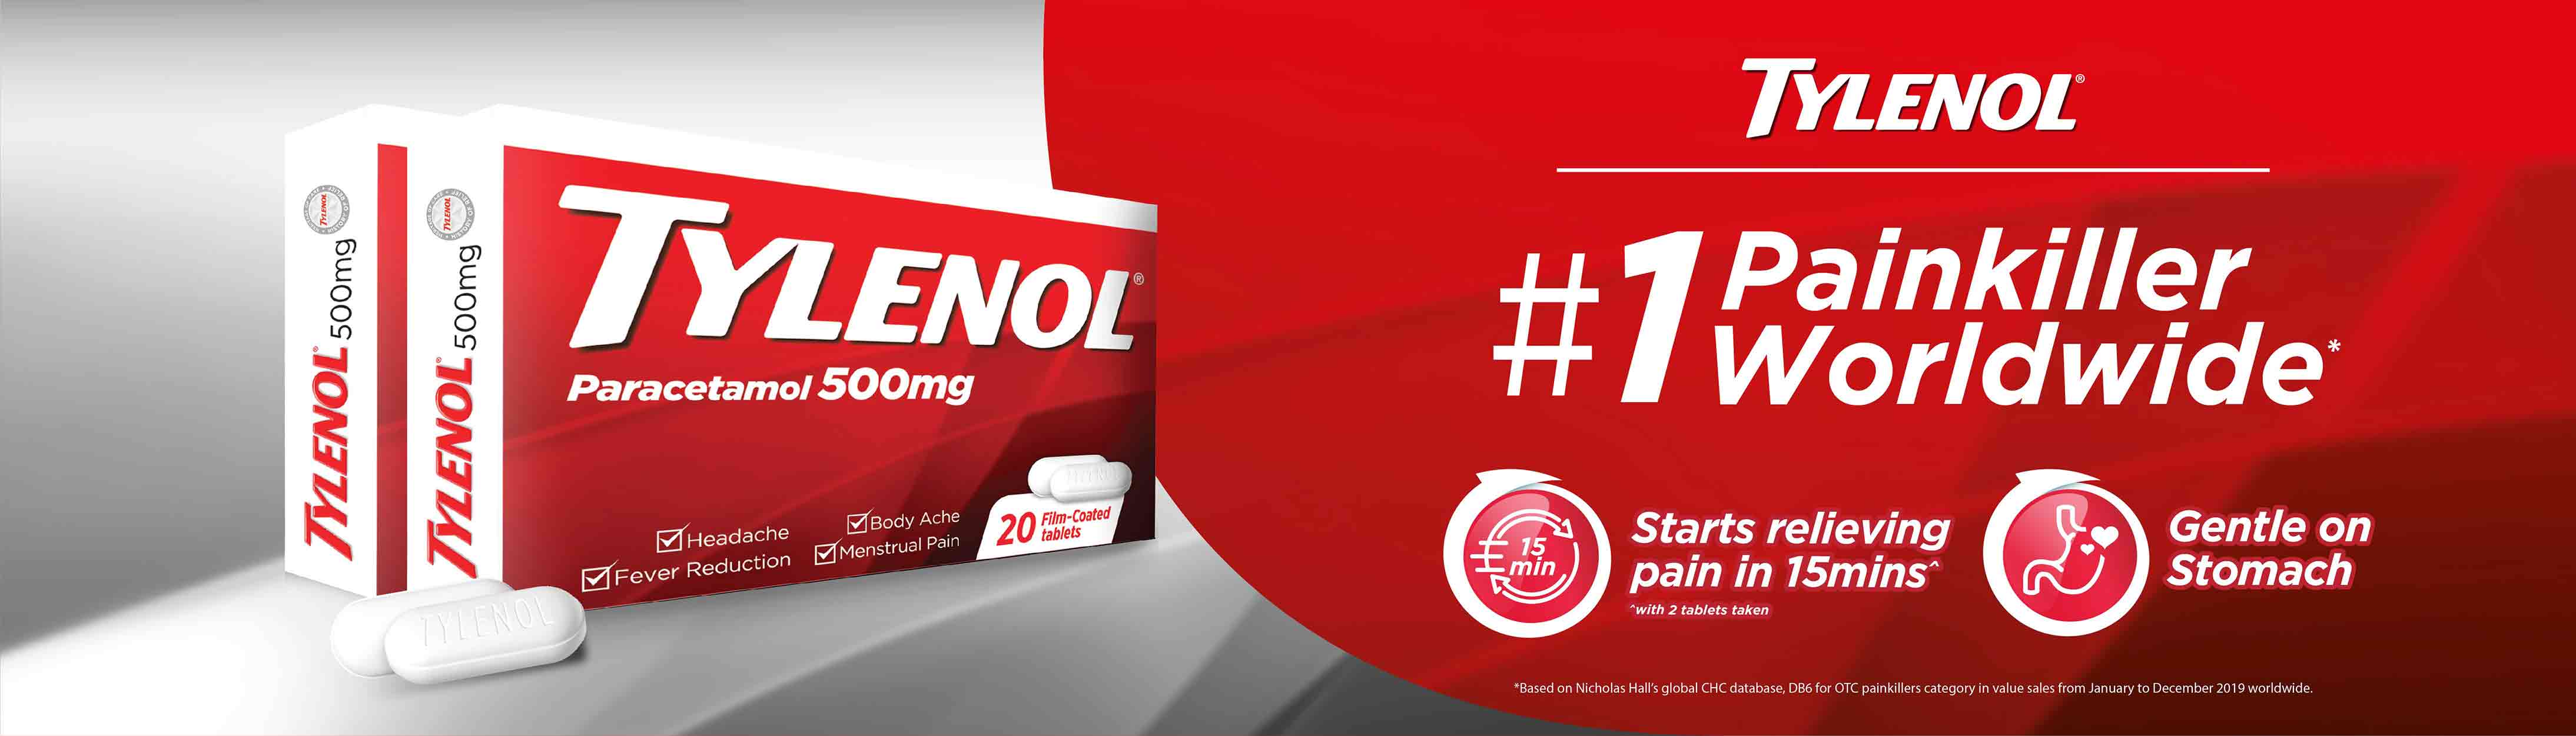 Tylenol #1 Painkiller Worldwide, starts relieving pain in 15 mins and is gentle on your stomach